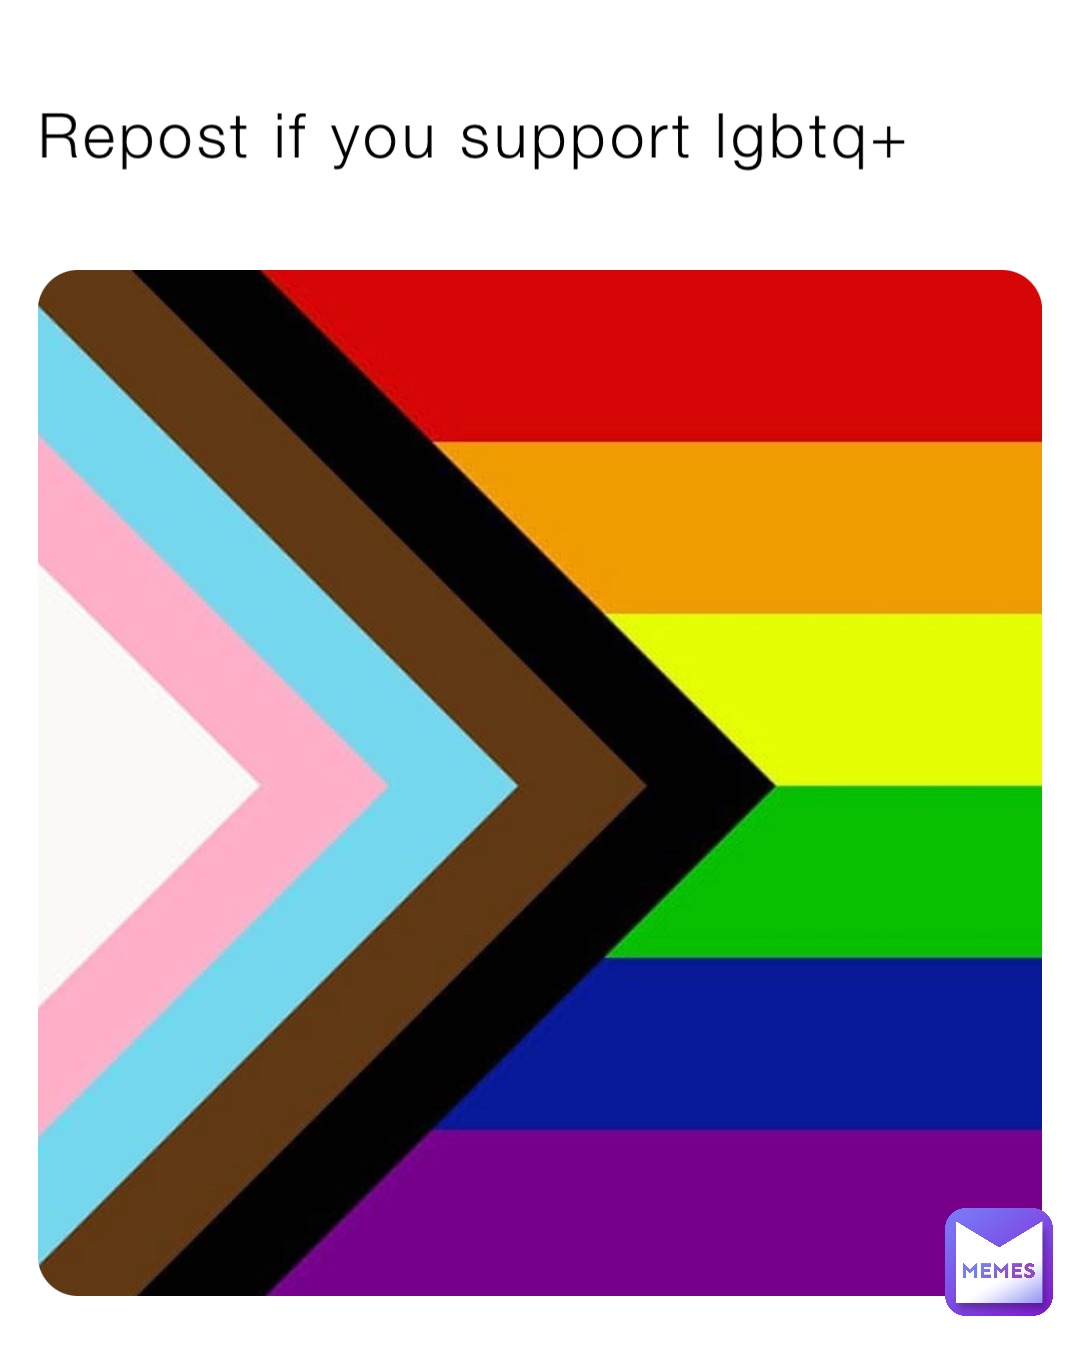 Repost if you support lgbtq+